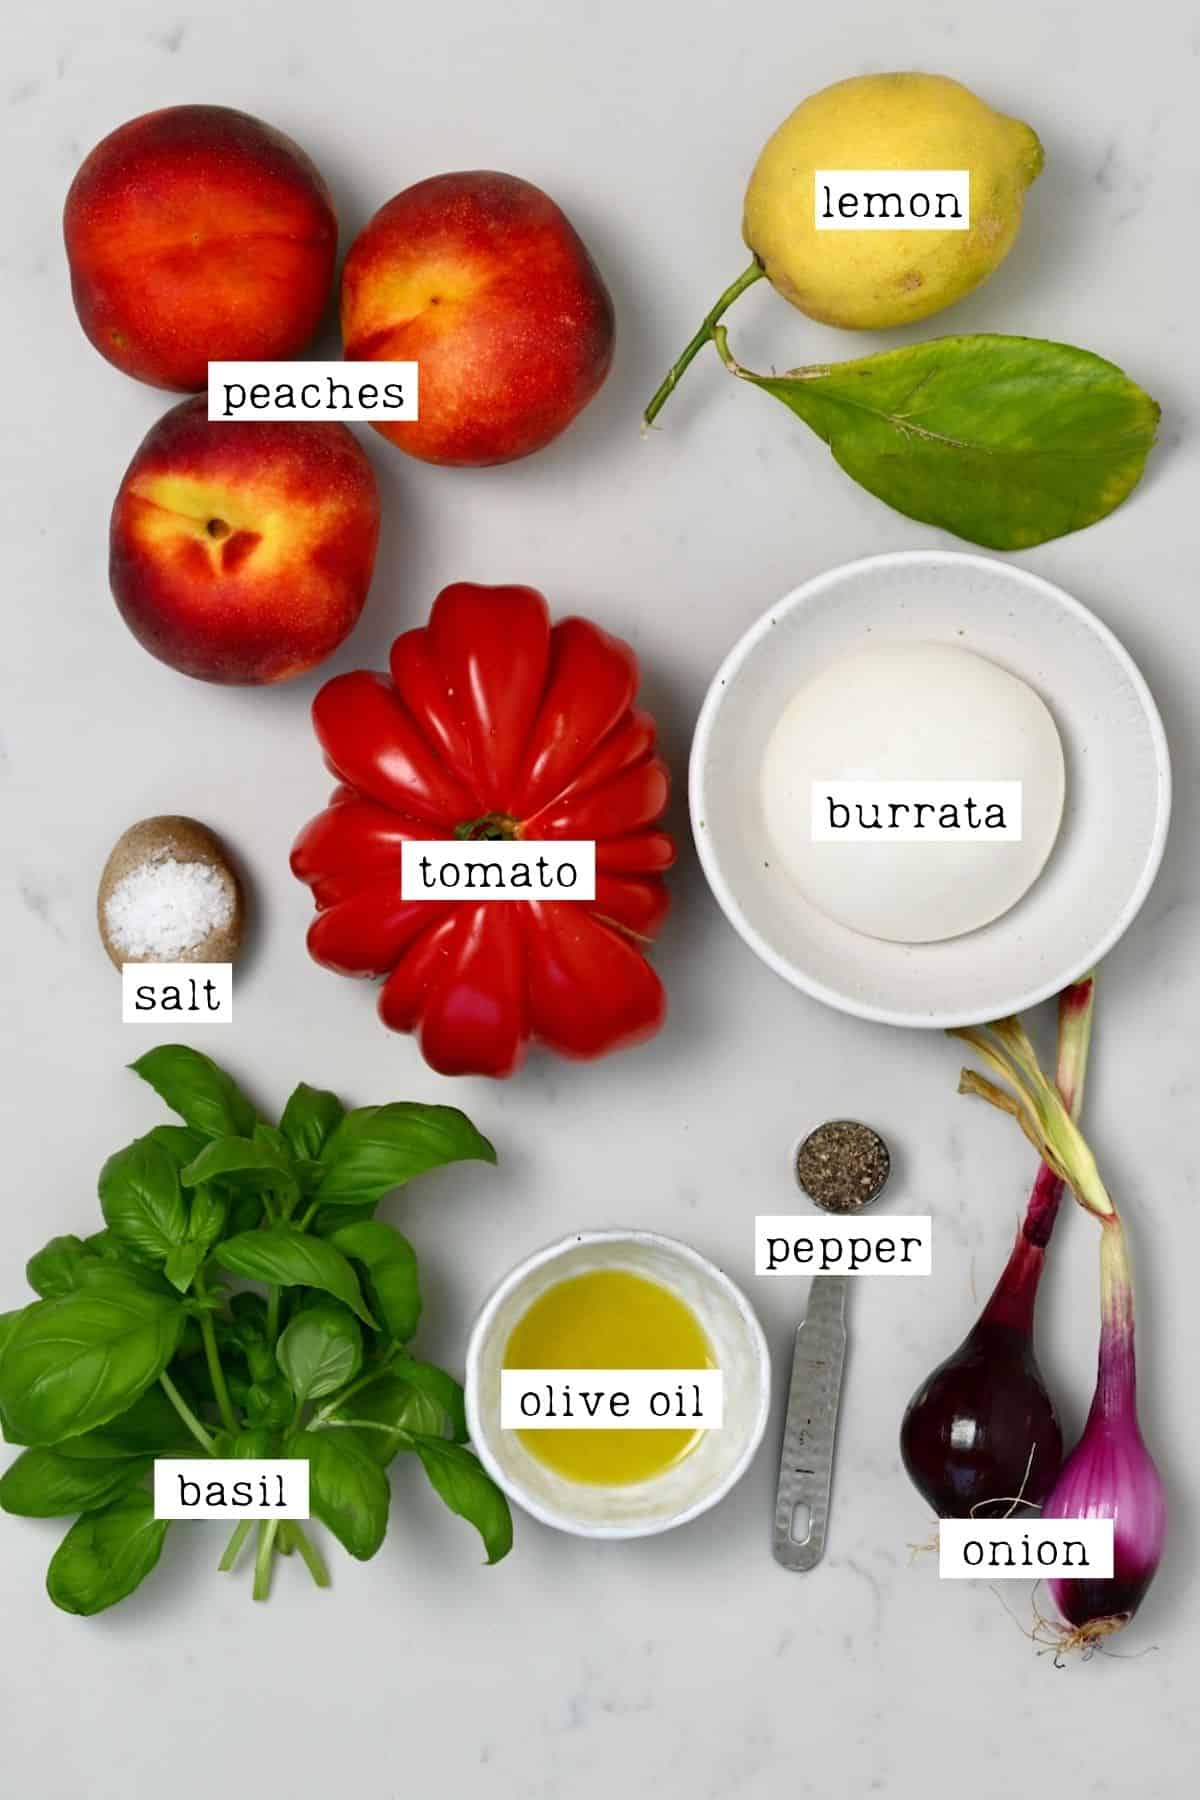 Ingredients for peach and tomato salad